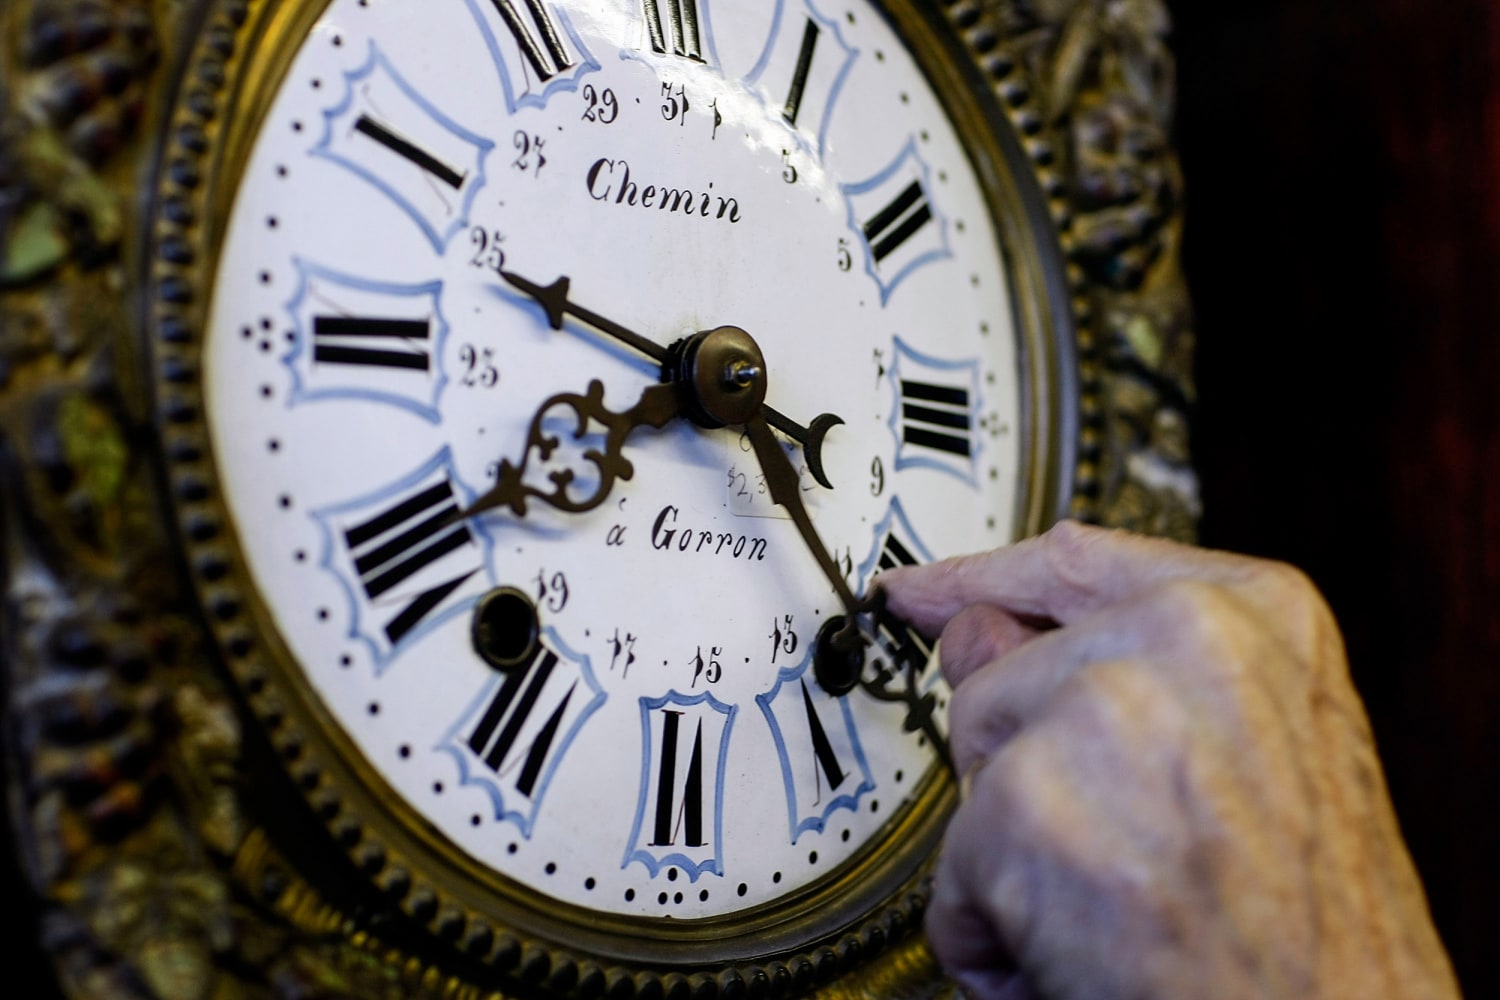 Daylight saving time has ended. It really should go on forever. - Vox